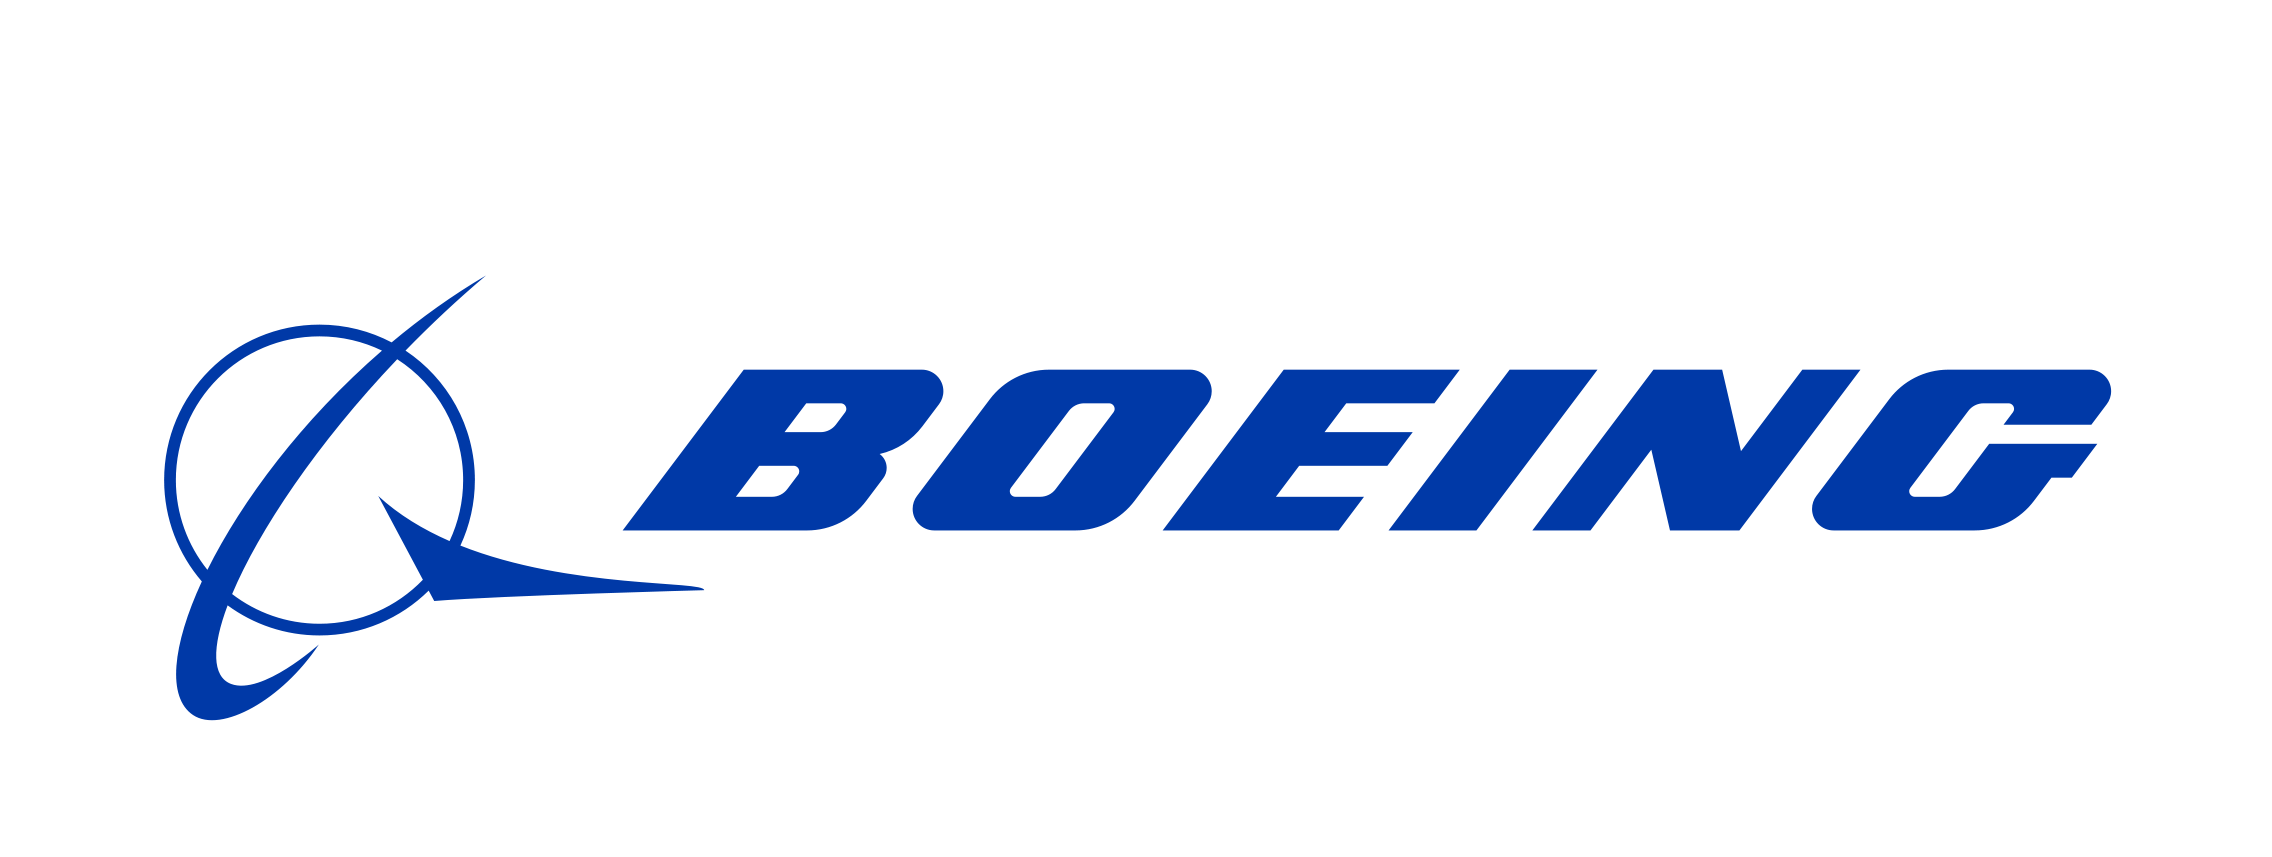 Boeing Logo - Boeing: Boeing Middle East